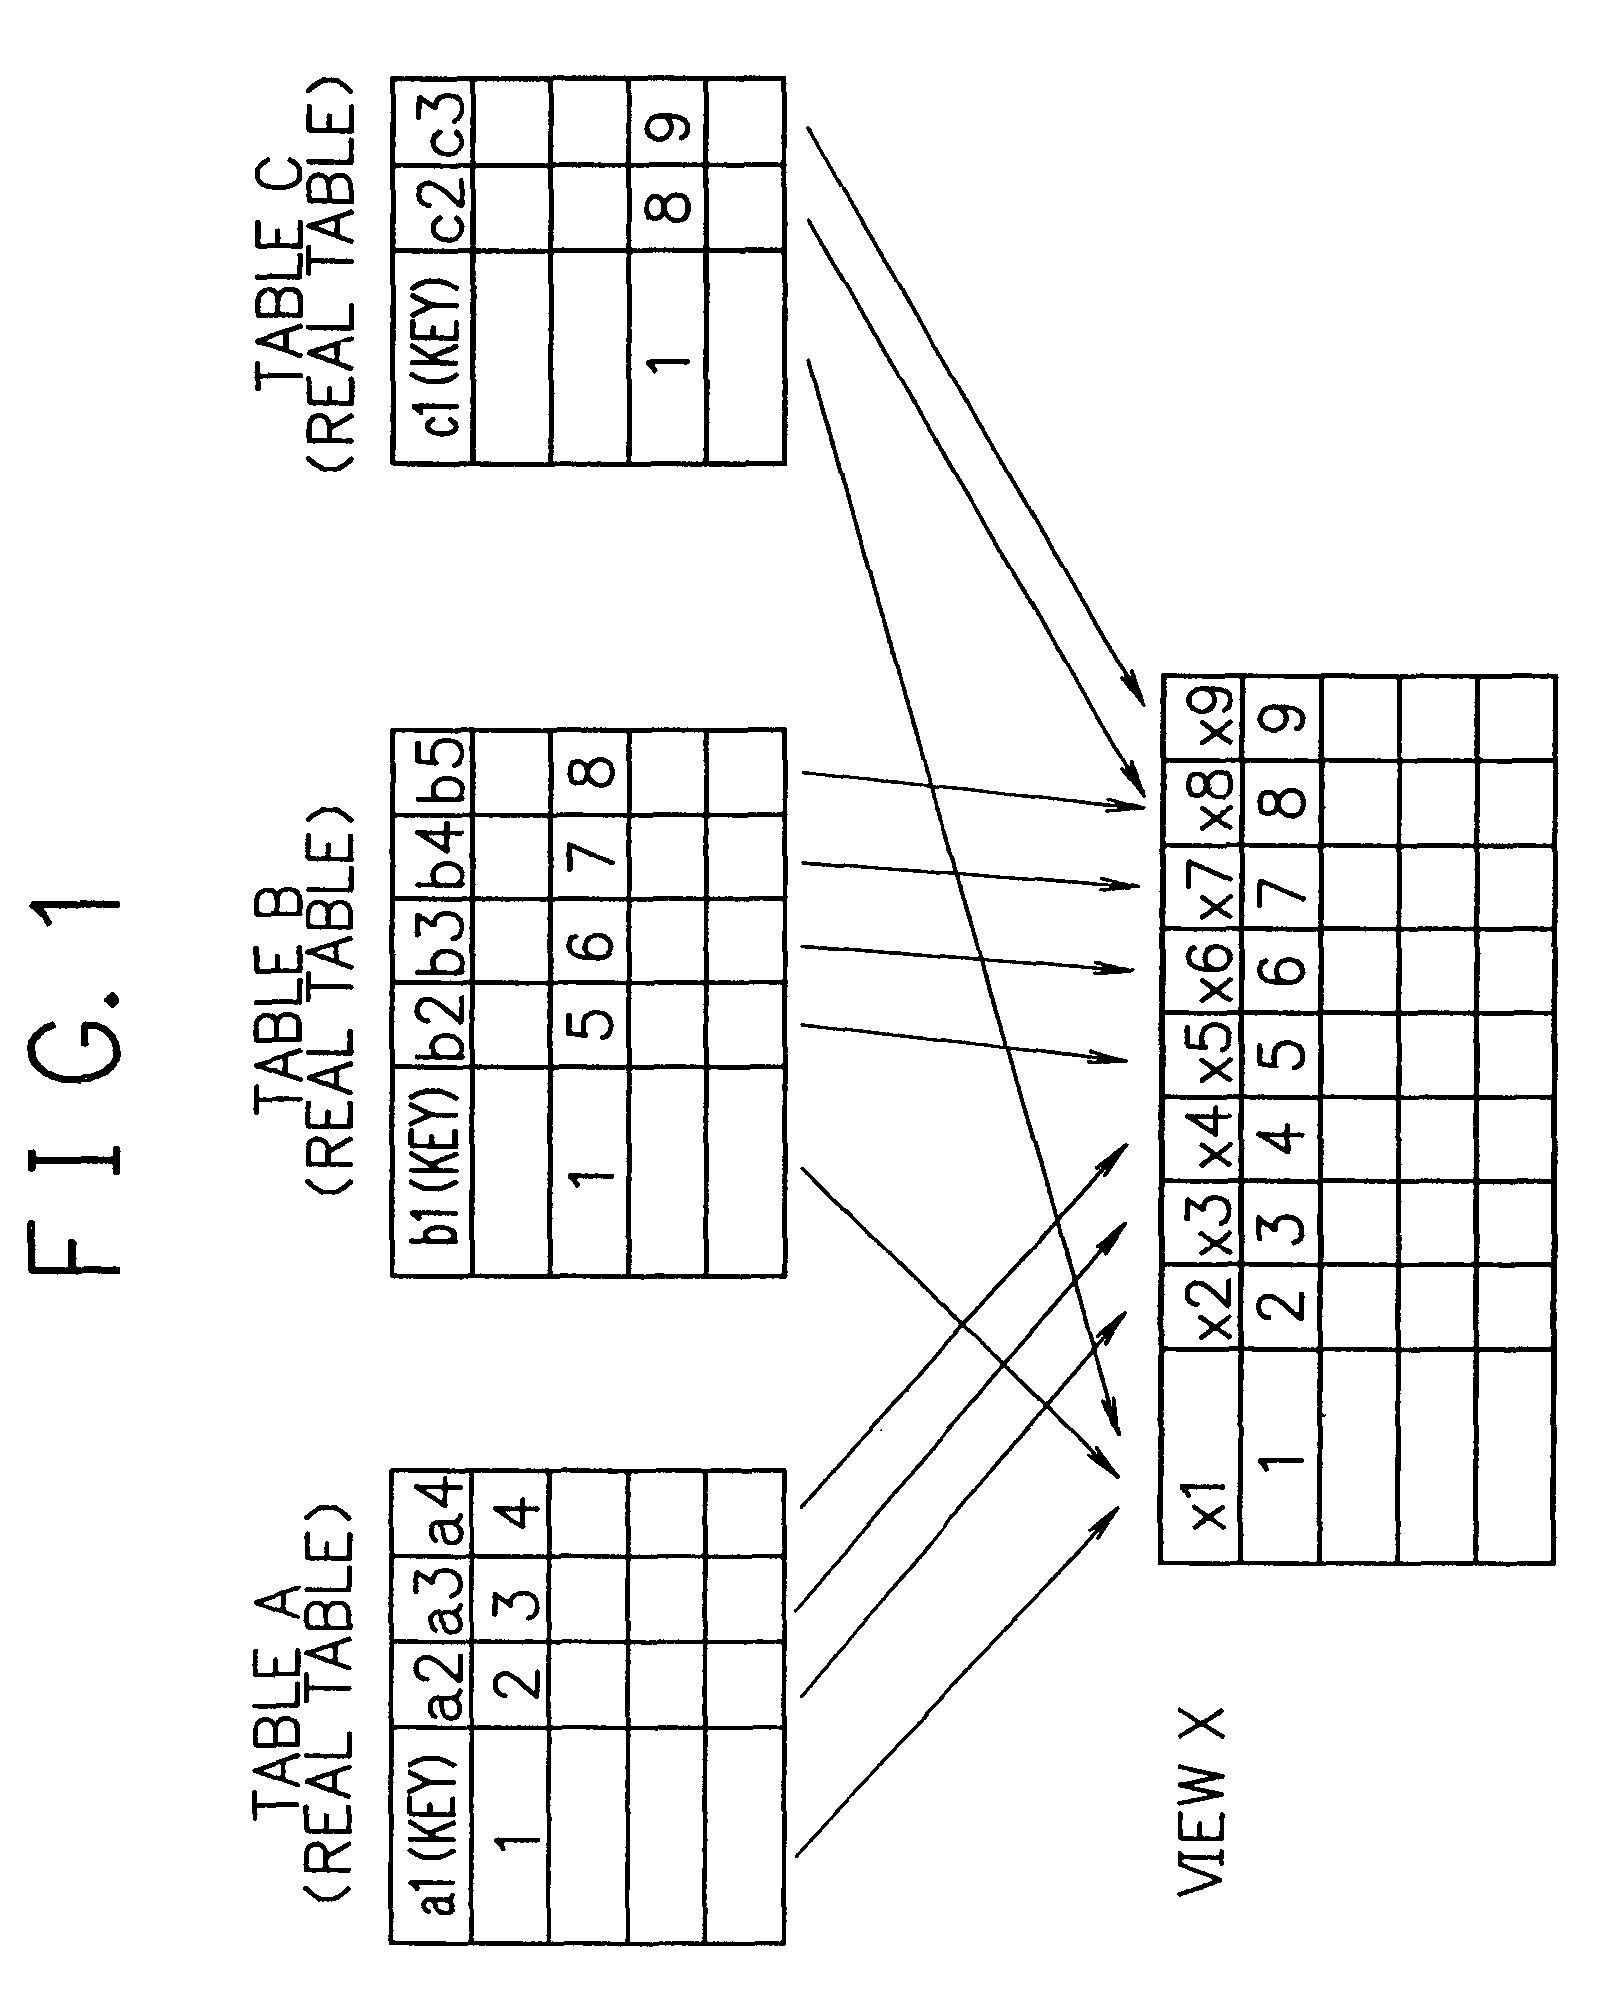 Database system and a method of data retrieval from the system